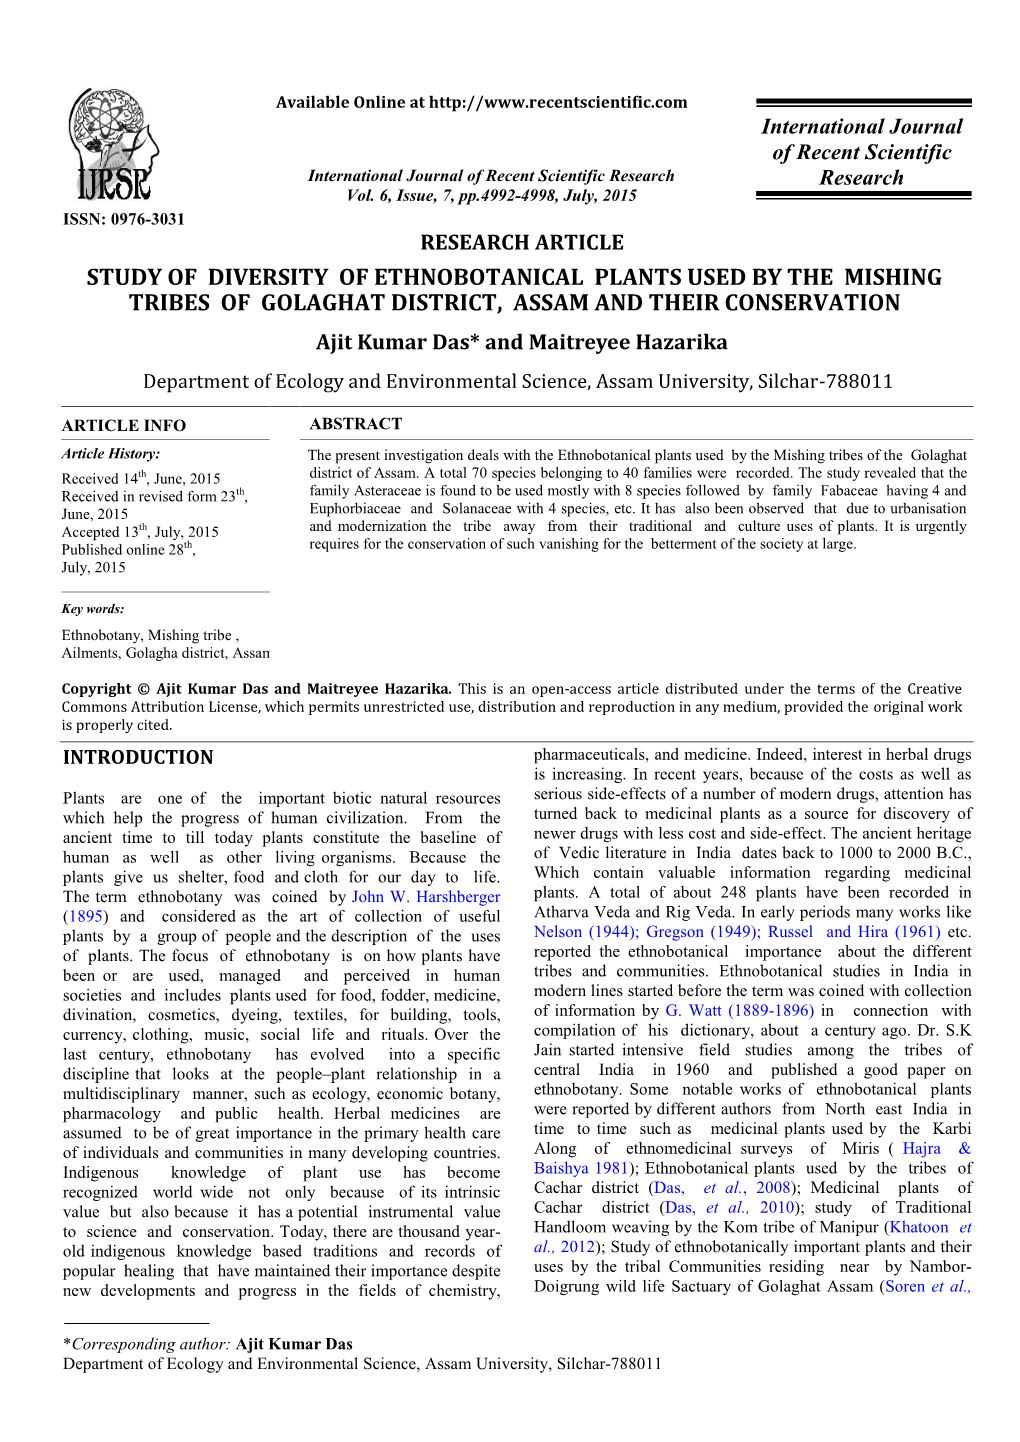 STUDY of DIVERSITY of ETHNOBOTANICAL PLANTS USED by the MISHING TRIBES of GOLAGHAT DISTRICT, ASSAM and THEIR CONSERVATION Ajit Kumar Das* and Maitreyee Hazarika